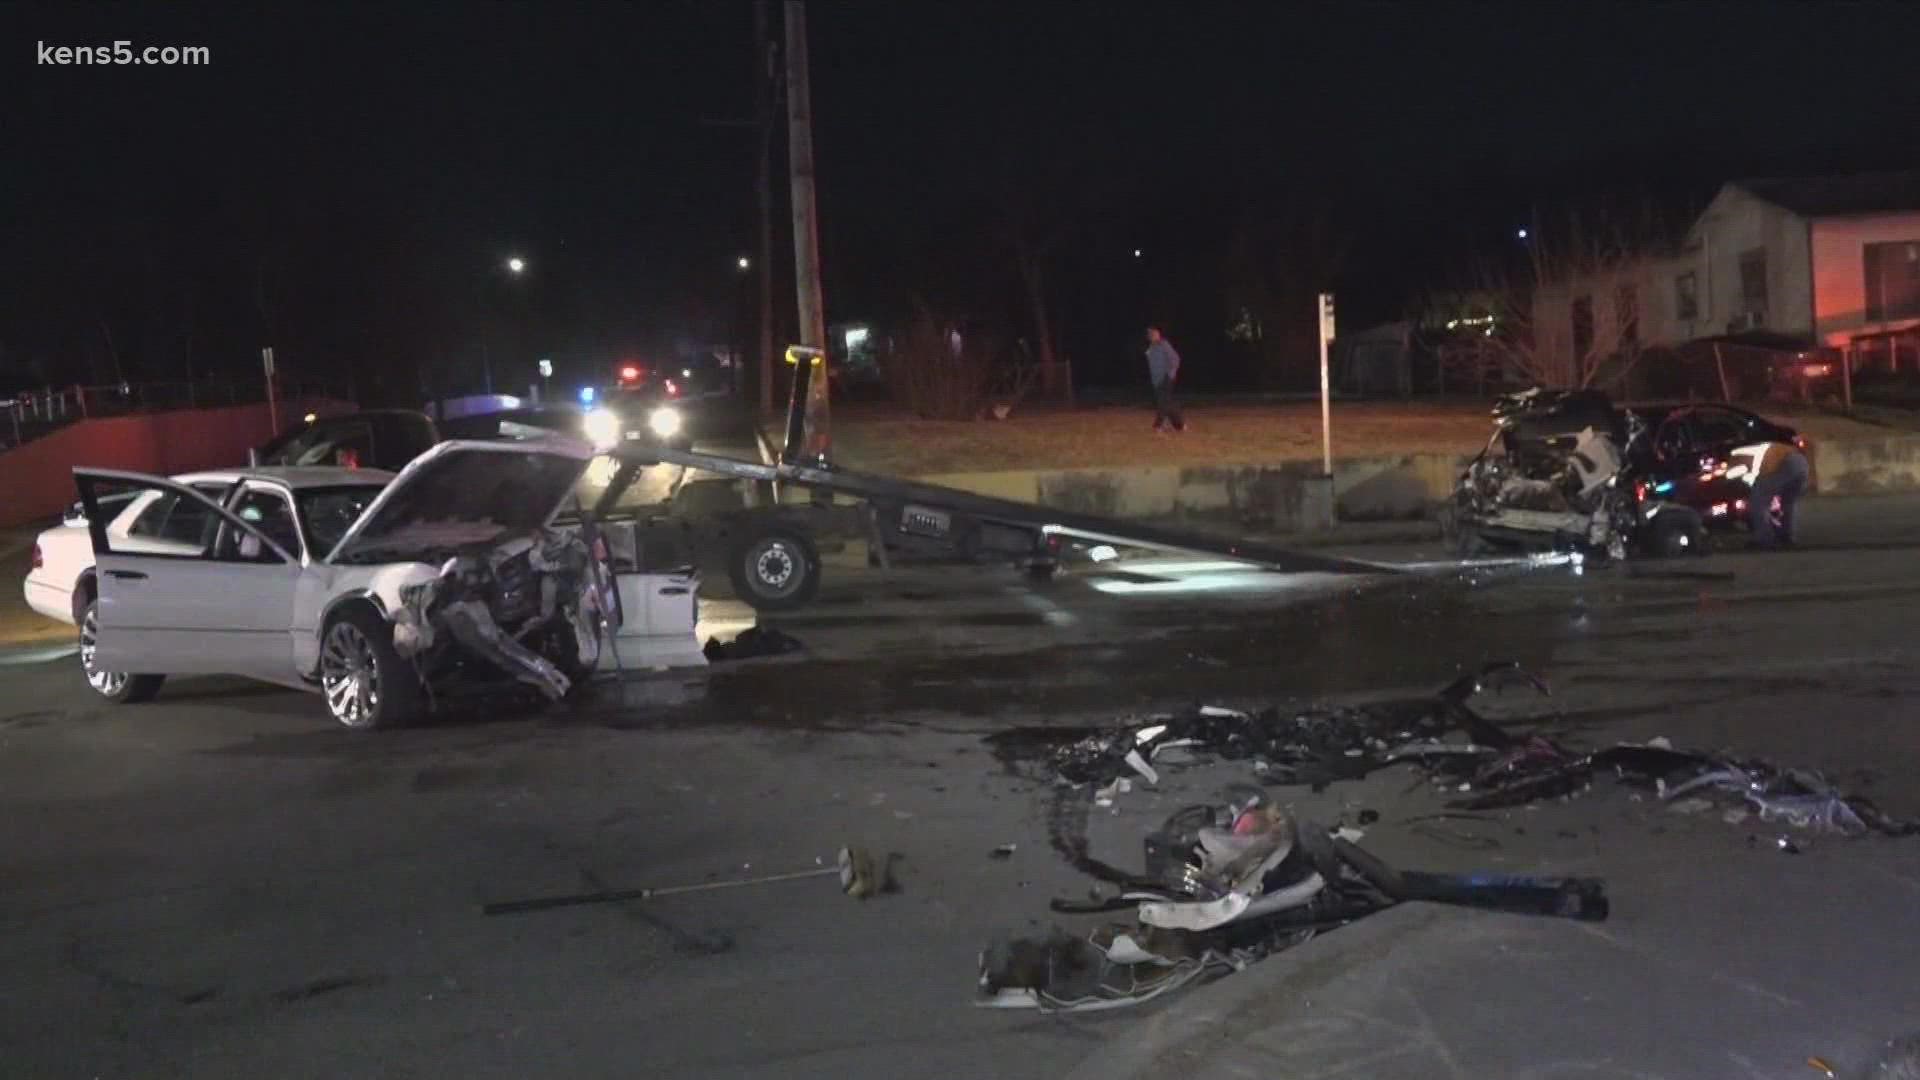 One of the drivers drove into oncoming traffic, causing a head-on collision, police said.